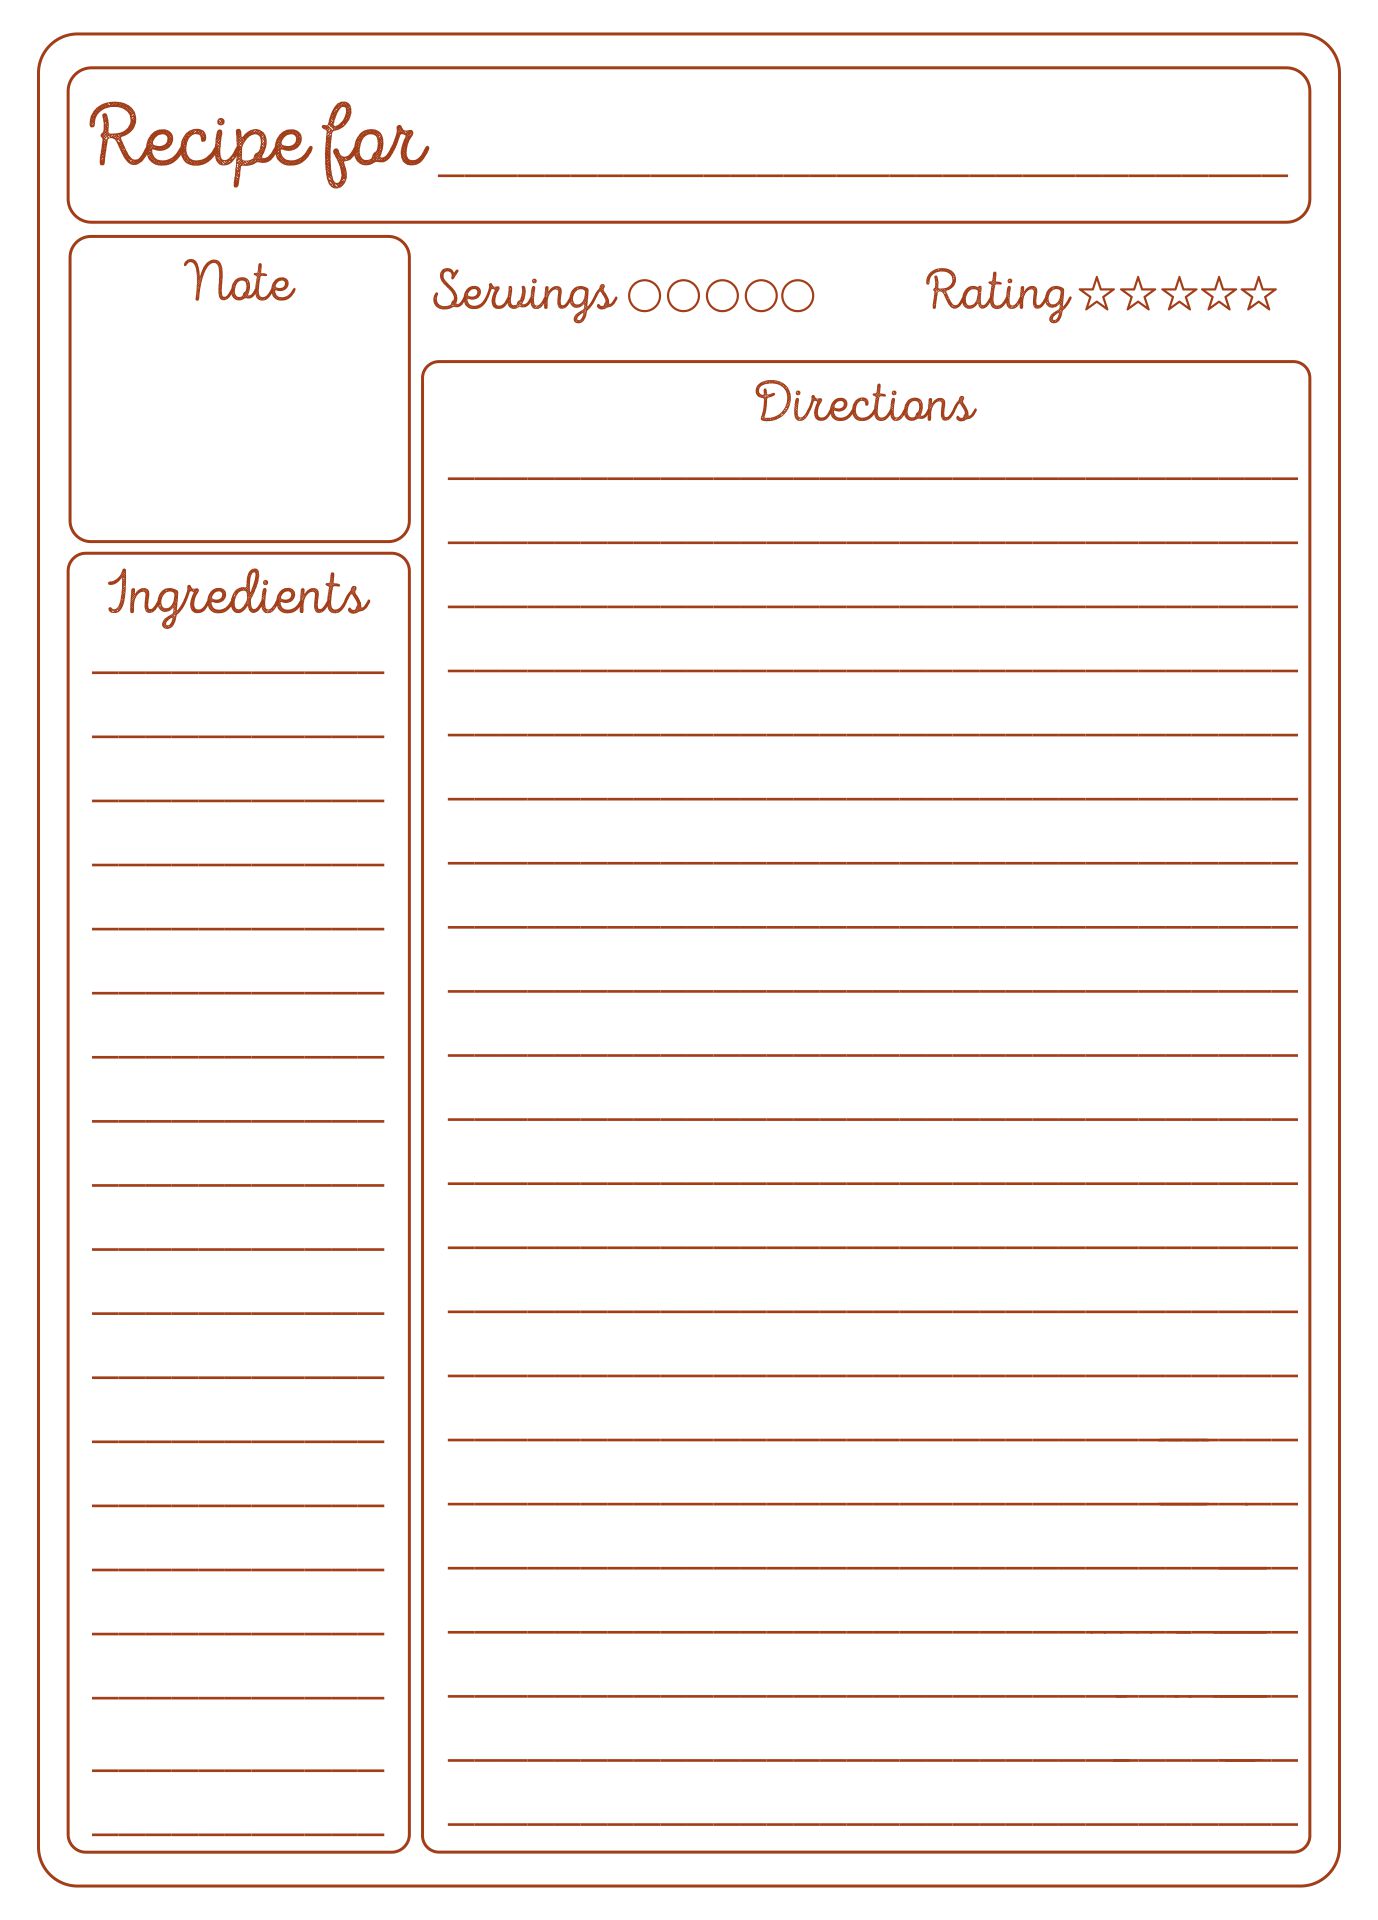 Word Recipe Card Template 4X6 For Your Needs